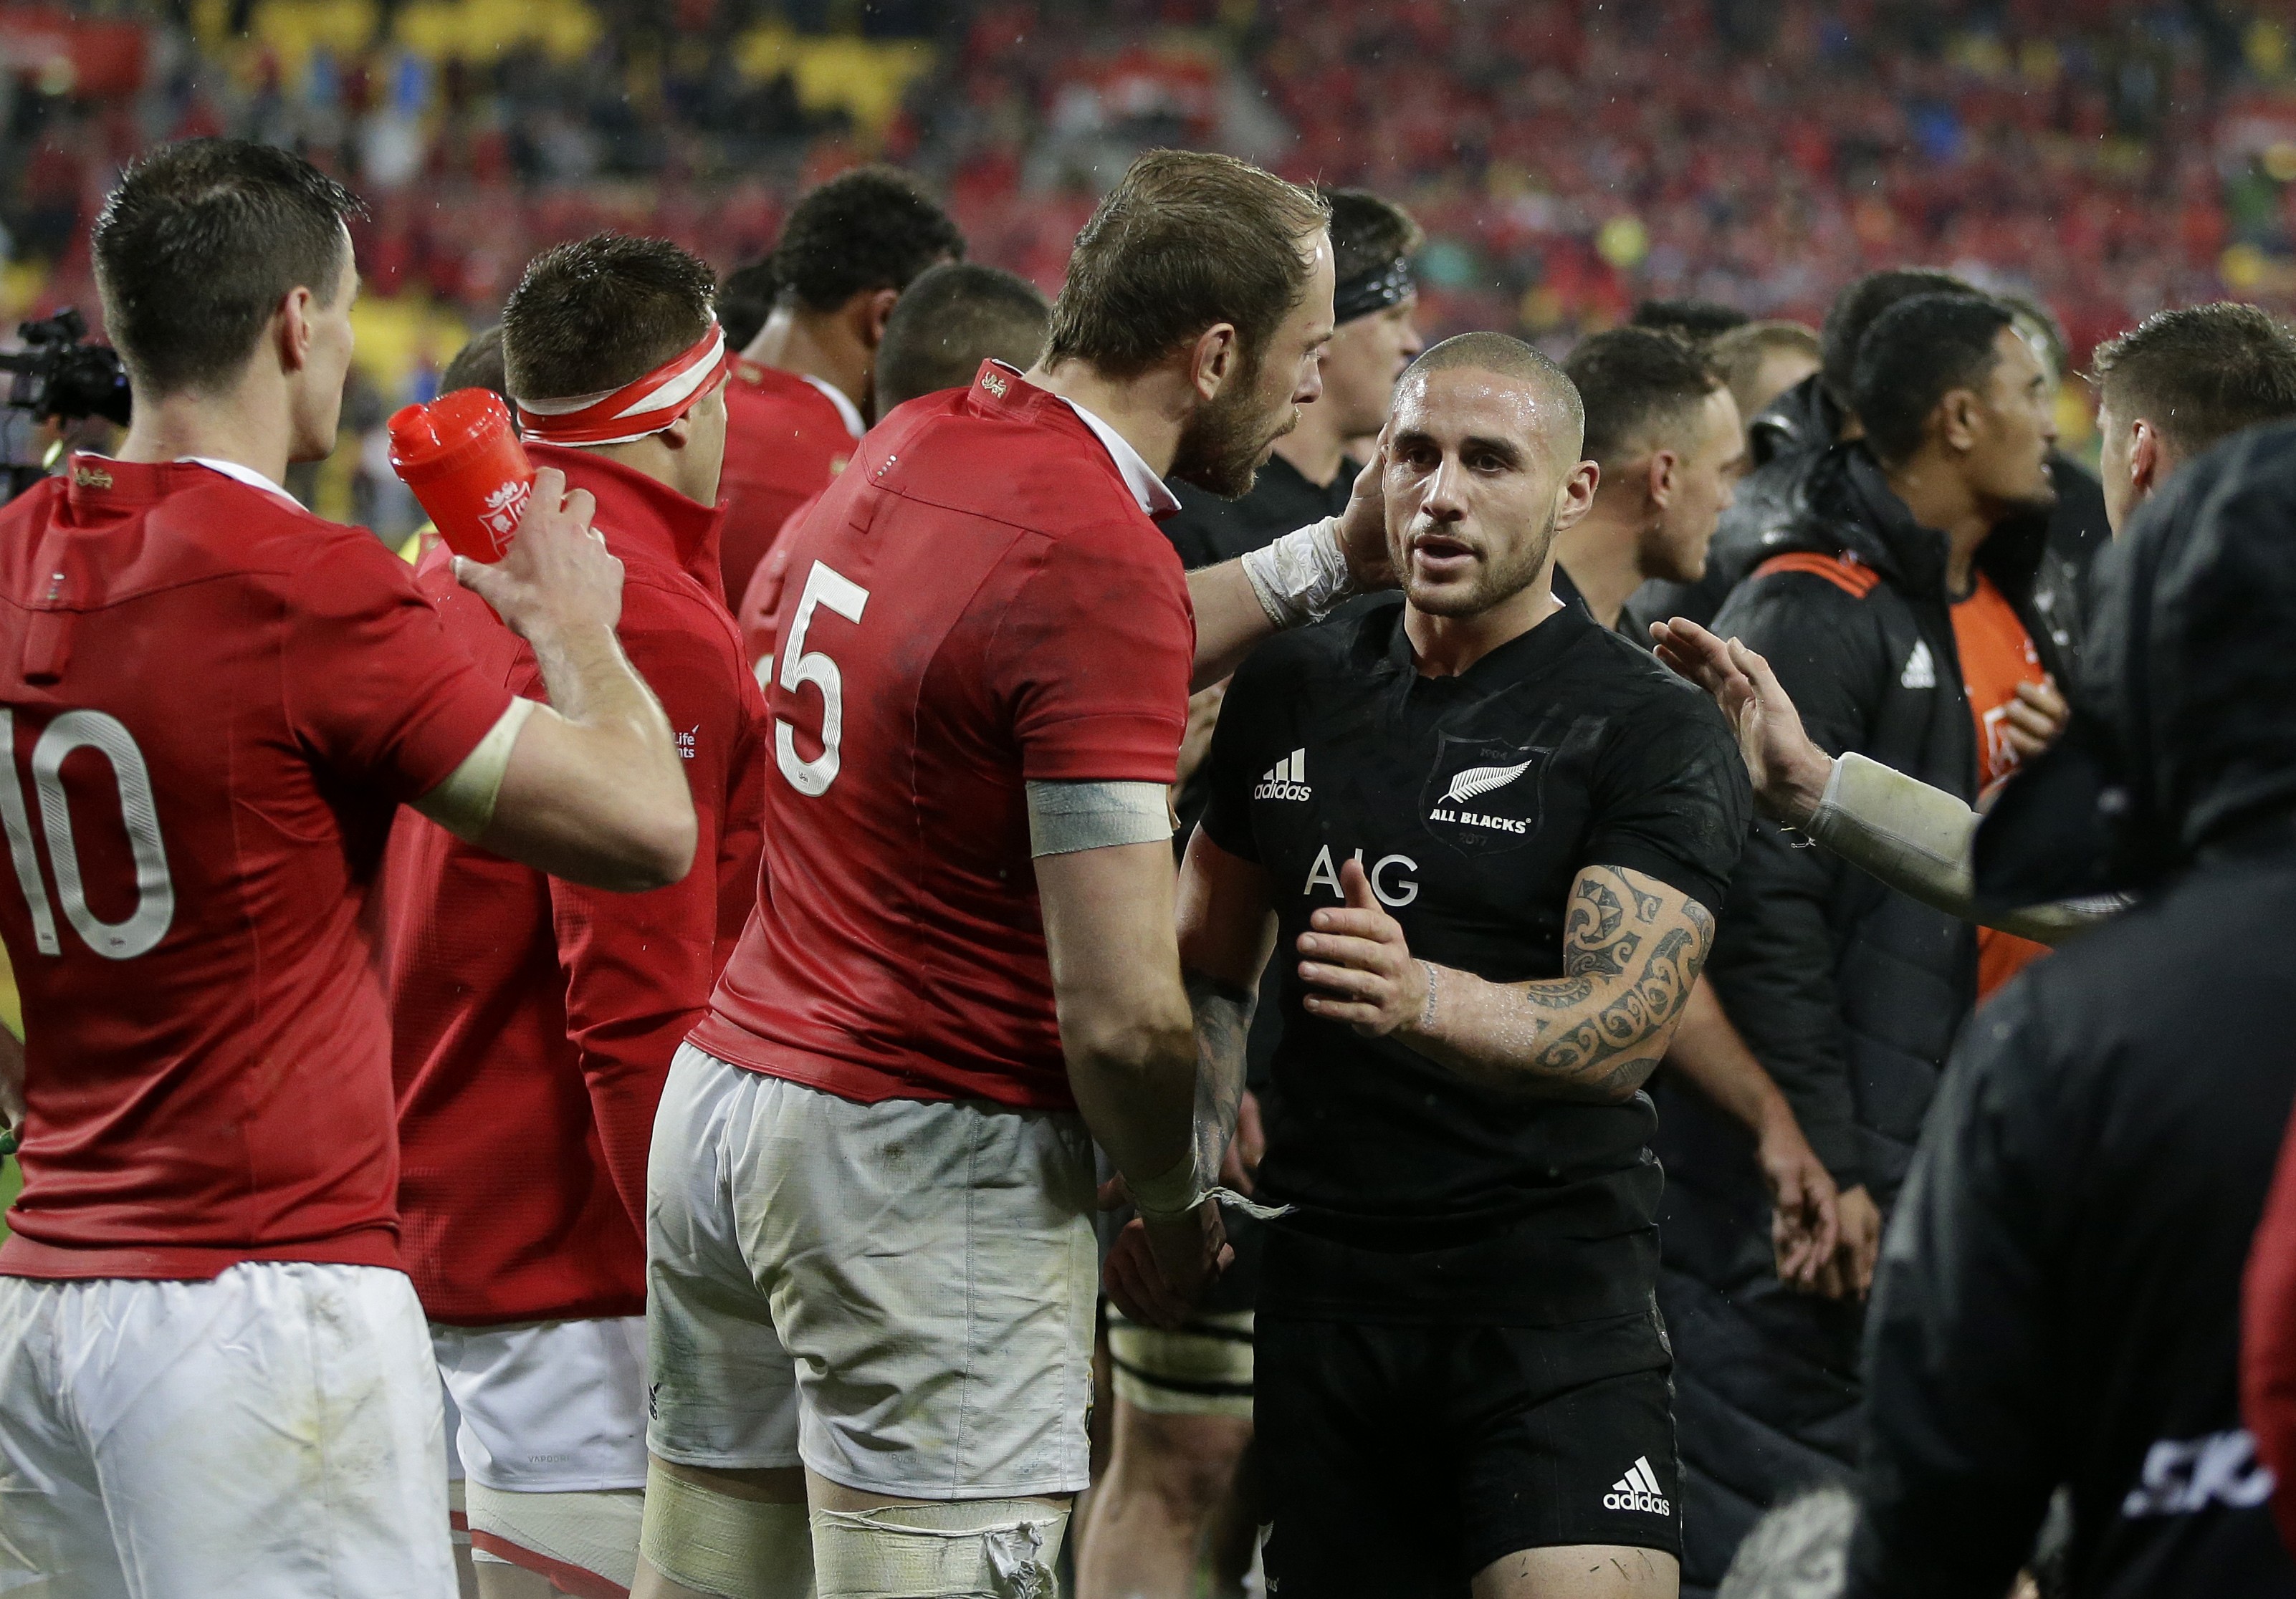 Lions second rower Alun Wyn Jones expects New Zealand to return for the third and final test at their best. Photo: AP